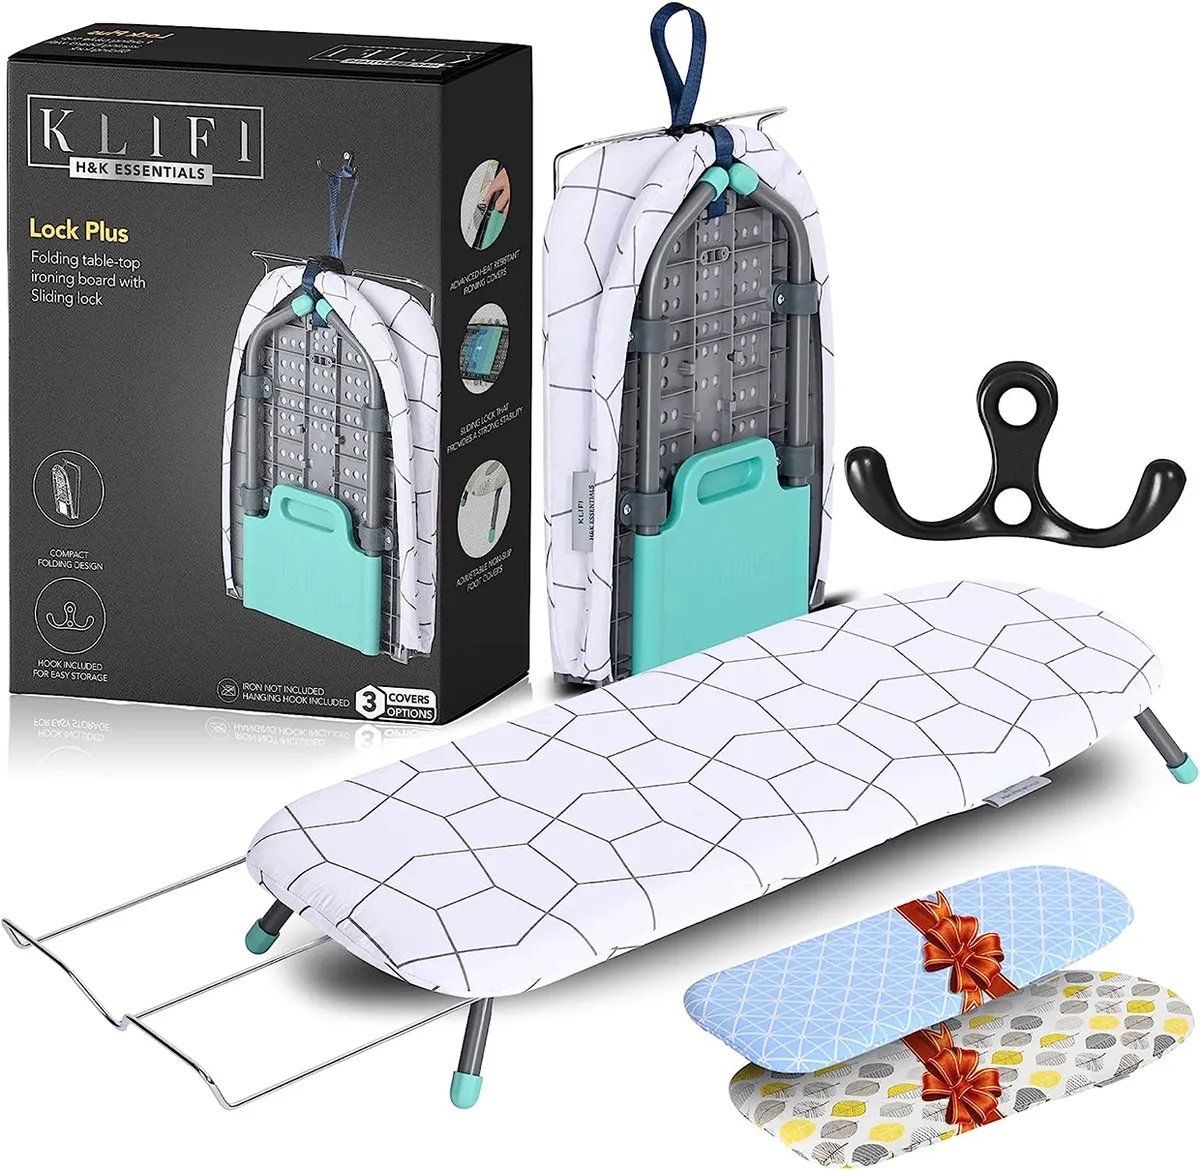 KLIFI ultra compact ironing board for quilters